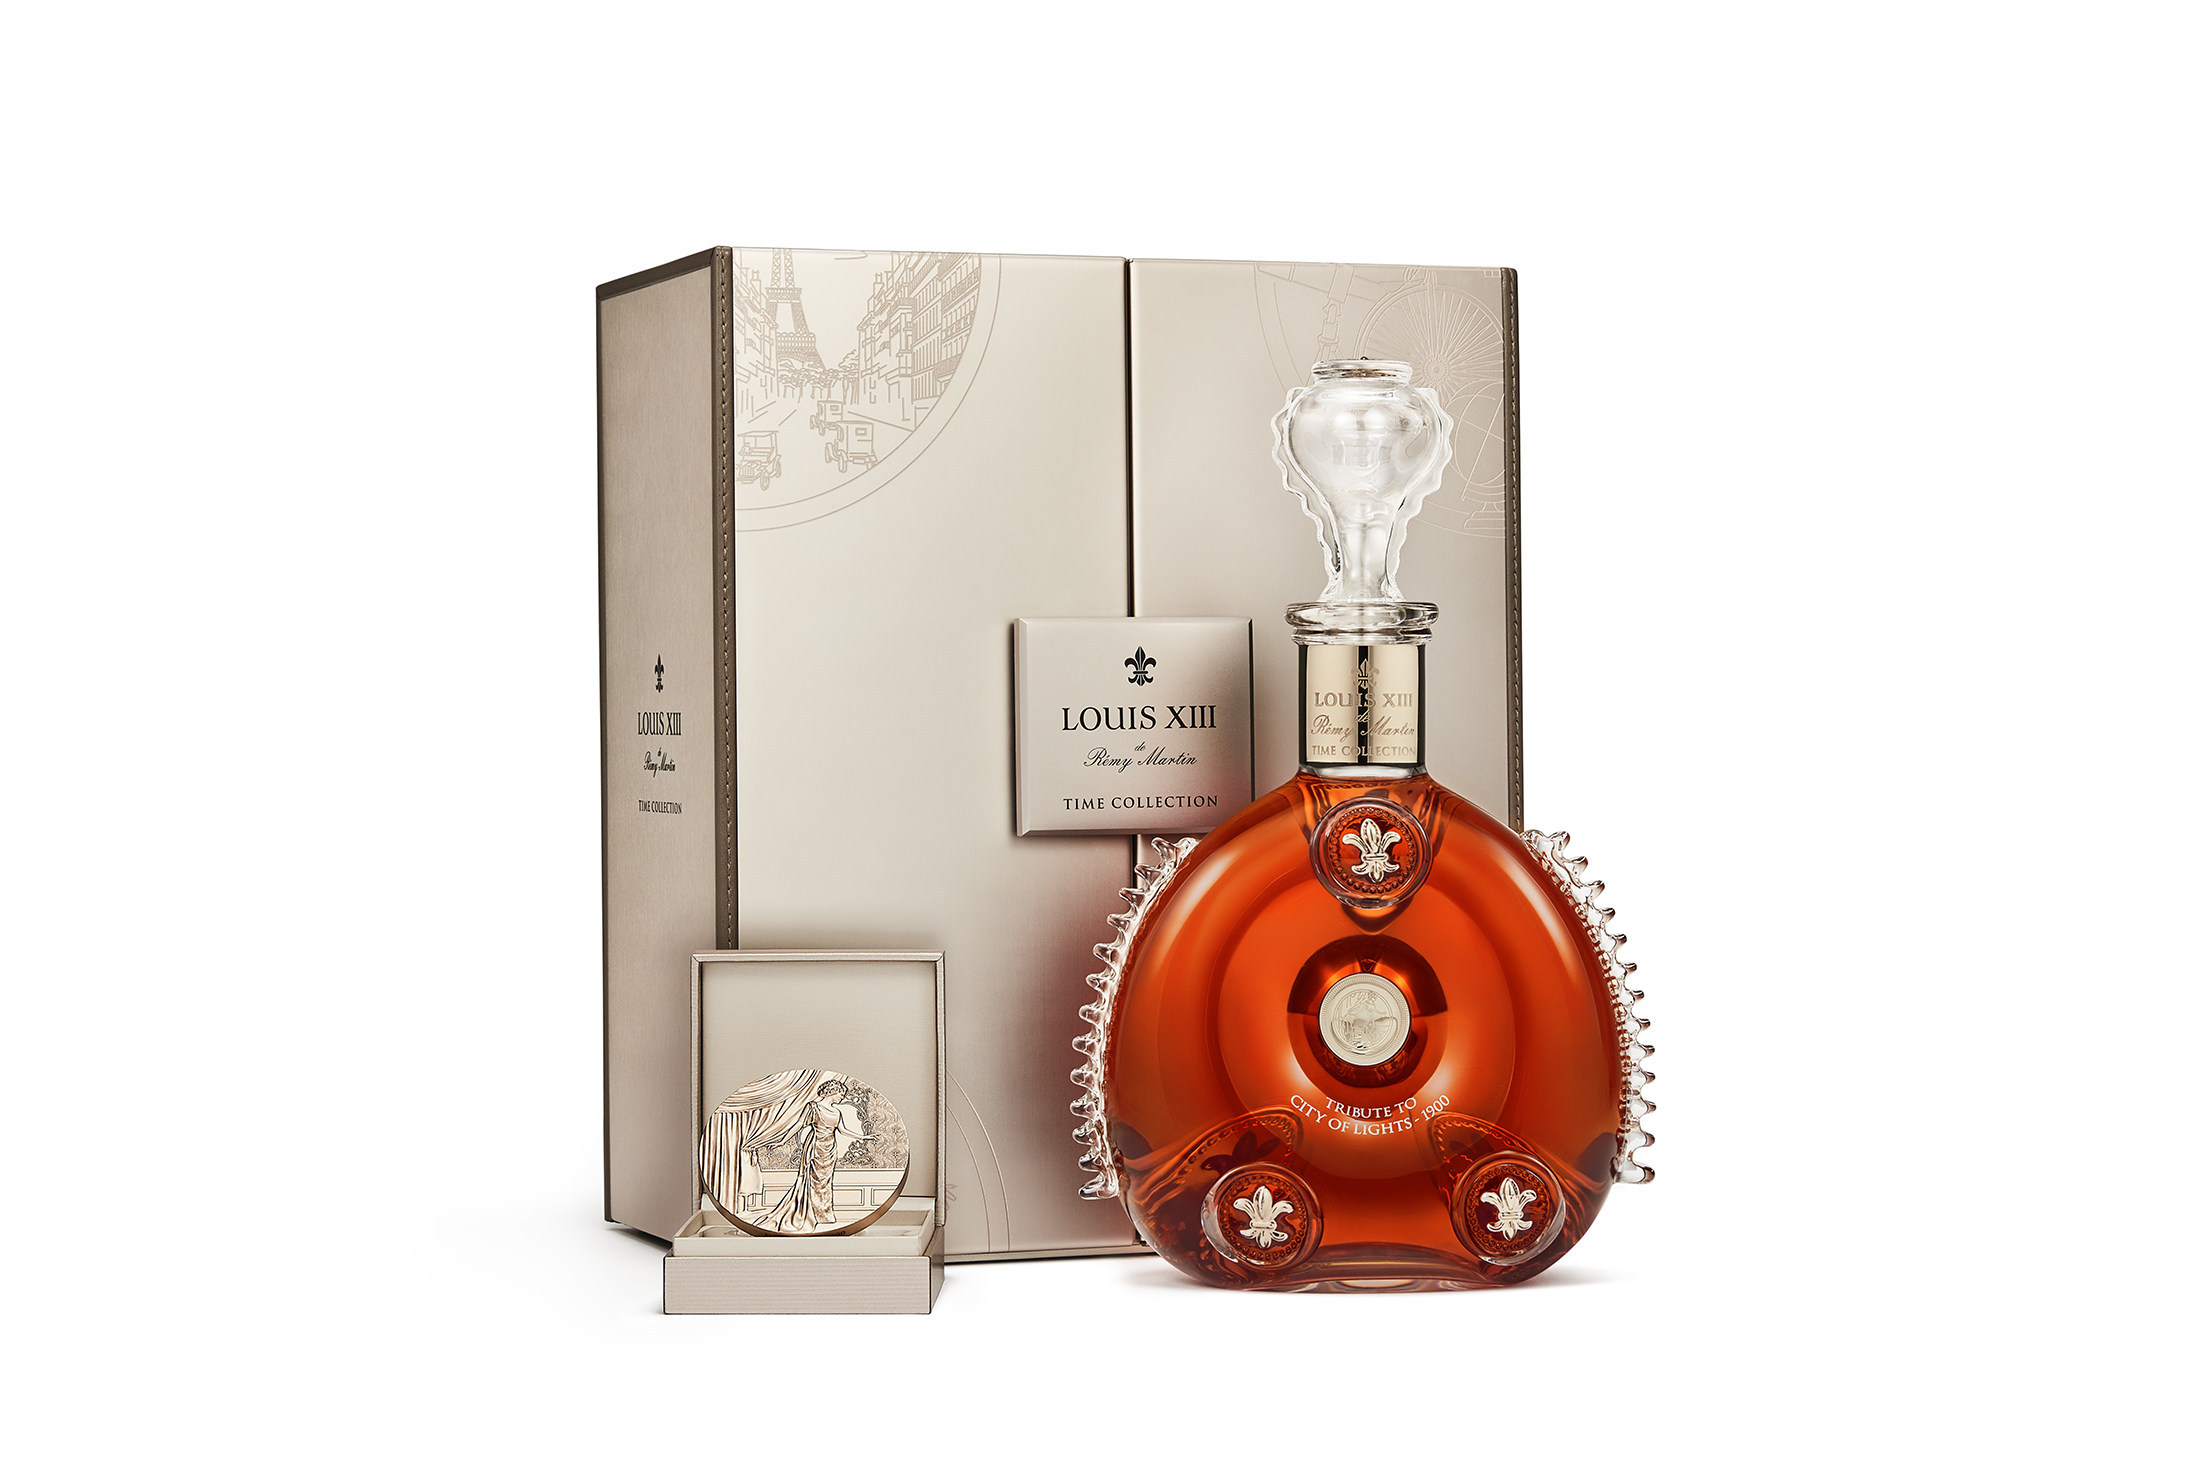 Louis XIII Cognac time collection 1900